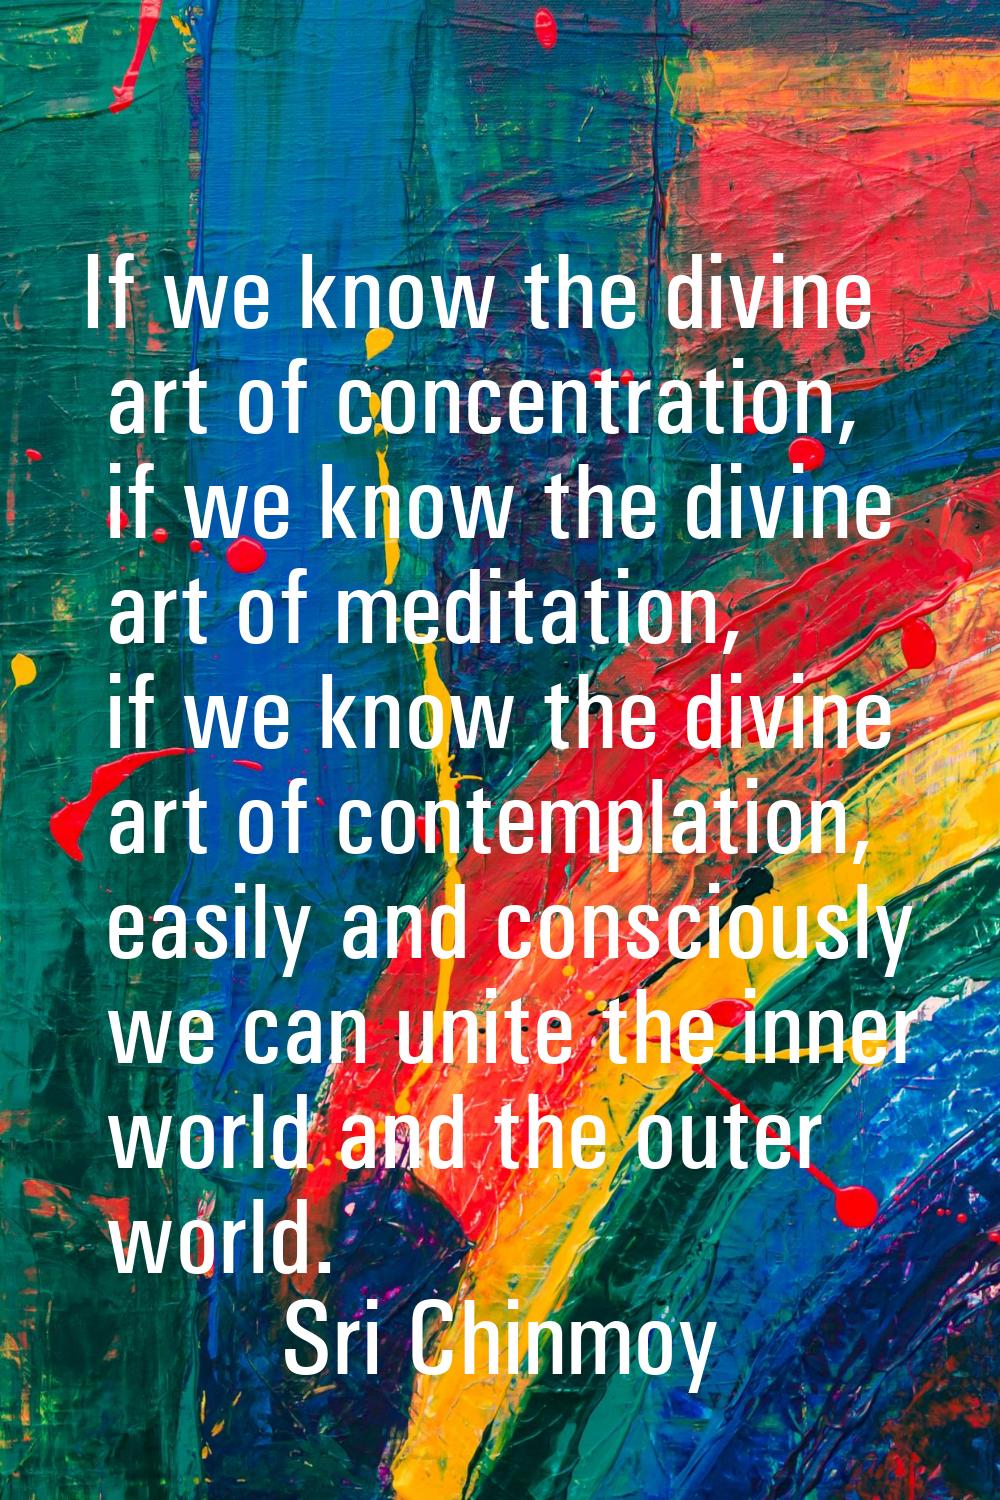 If we know the divine art of concentration, if we know the divine art of meditation, if we know the